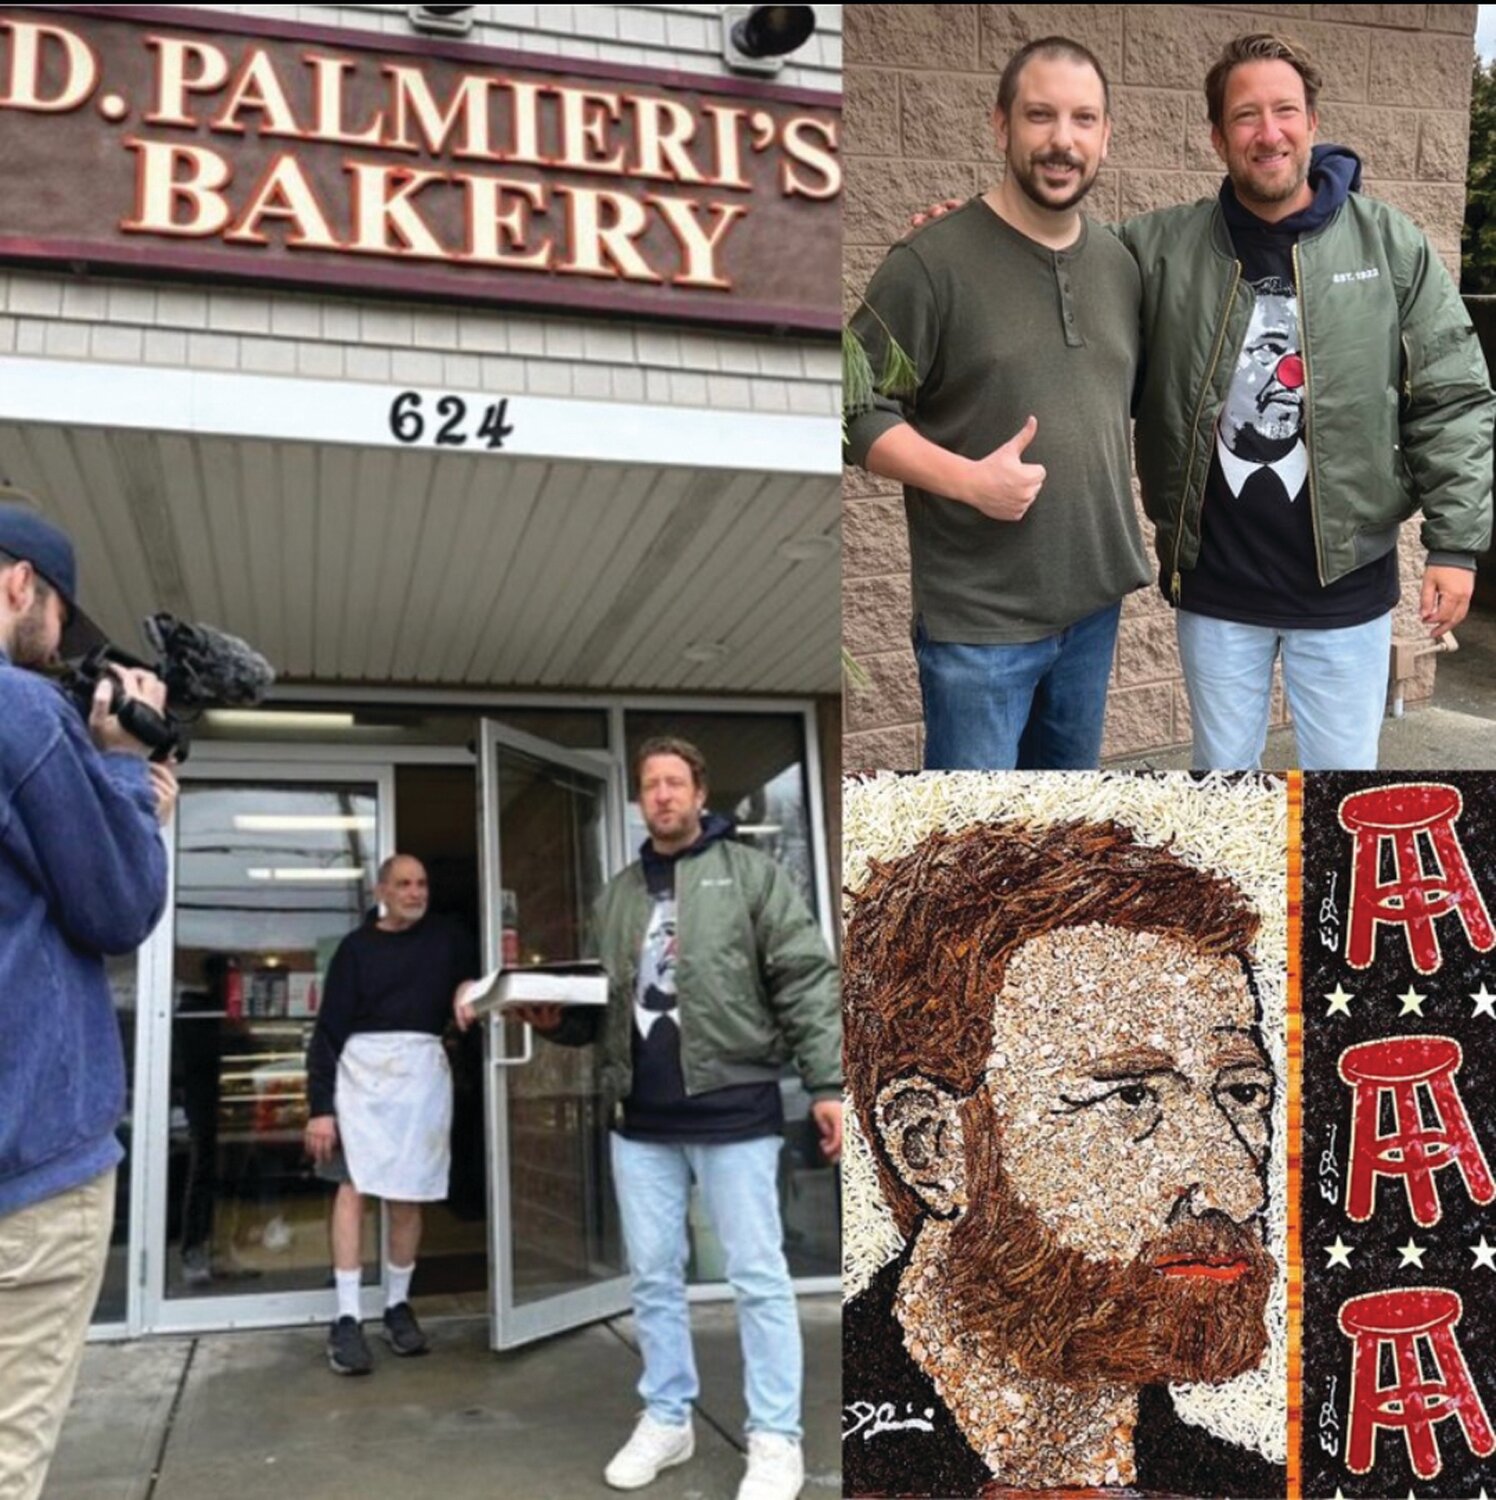 PIZZA ART: Eric Palmieri crafts portraits with pizza. He’s tackled an array of subjects from action star Sylvester Stallone to late Fall River murderess Lizzie Borden, to pizza reviewer and Barstool Sports magnate Dave Portnoy. Portnoy stopped by the Killingly Street bakery to do a pizza review last week.